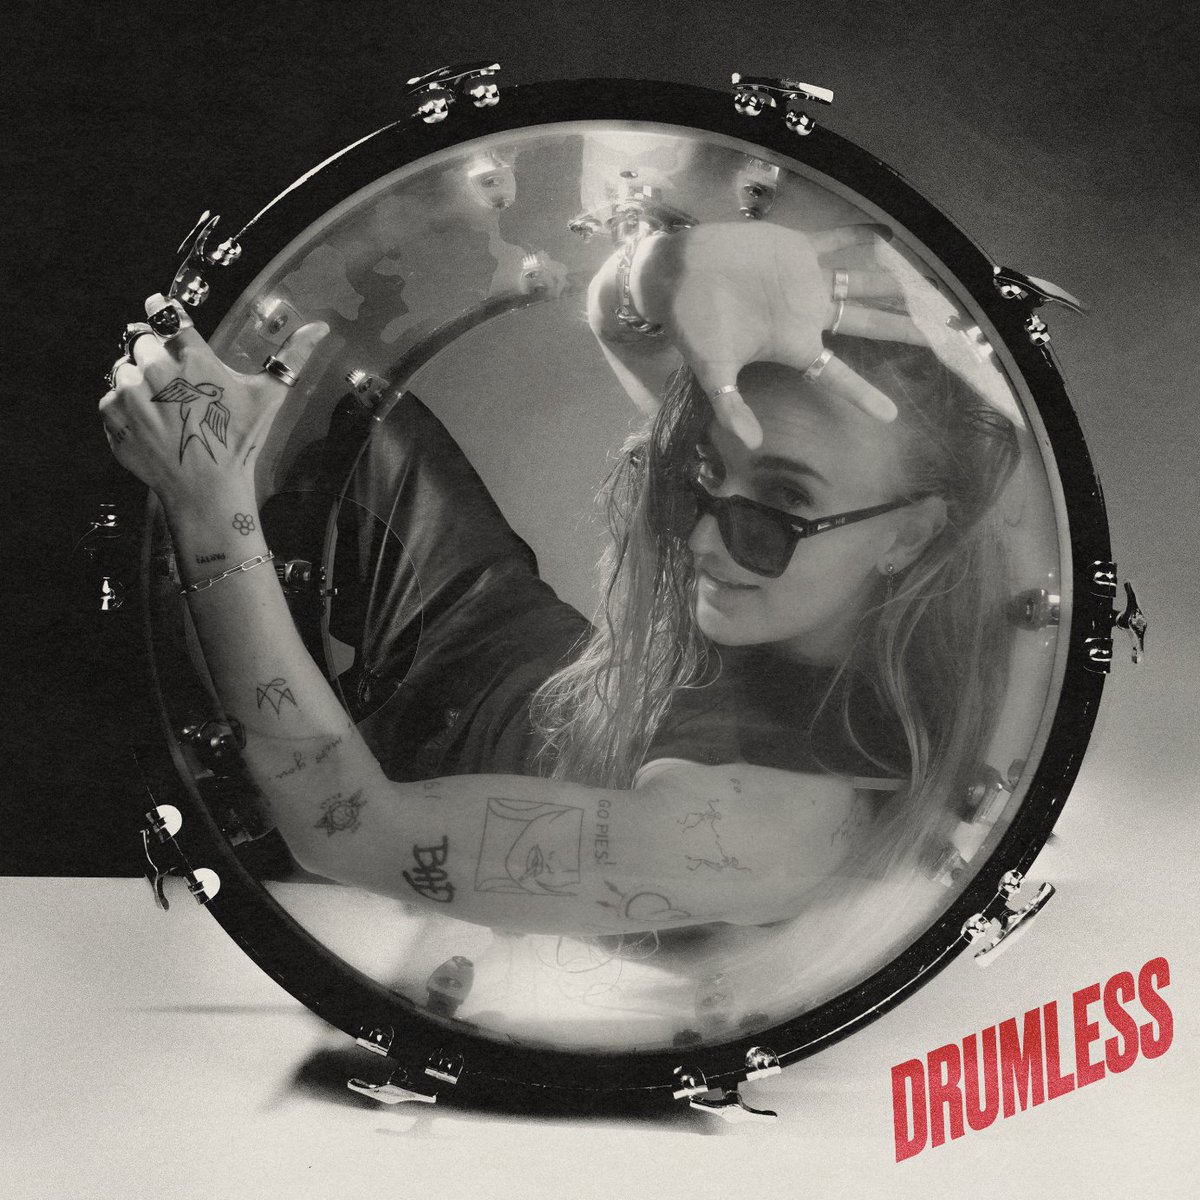 Ya guessed it !! I’m dropping my cute little “drumless” EP next Friday …… I love covering and rearranging songs so I did it for my own songs off DRUMMER but reproduced them and made them “drumless” ❌🥁 pre-order now: ffm.to/drumless